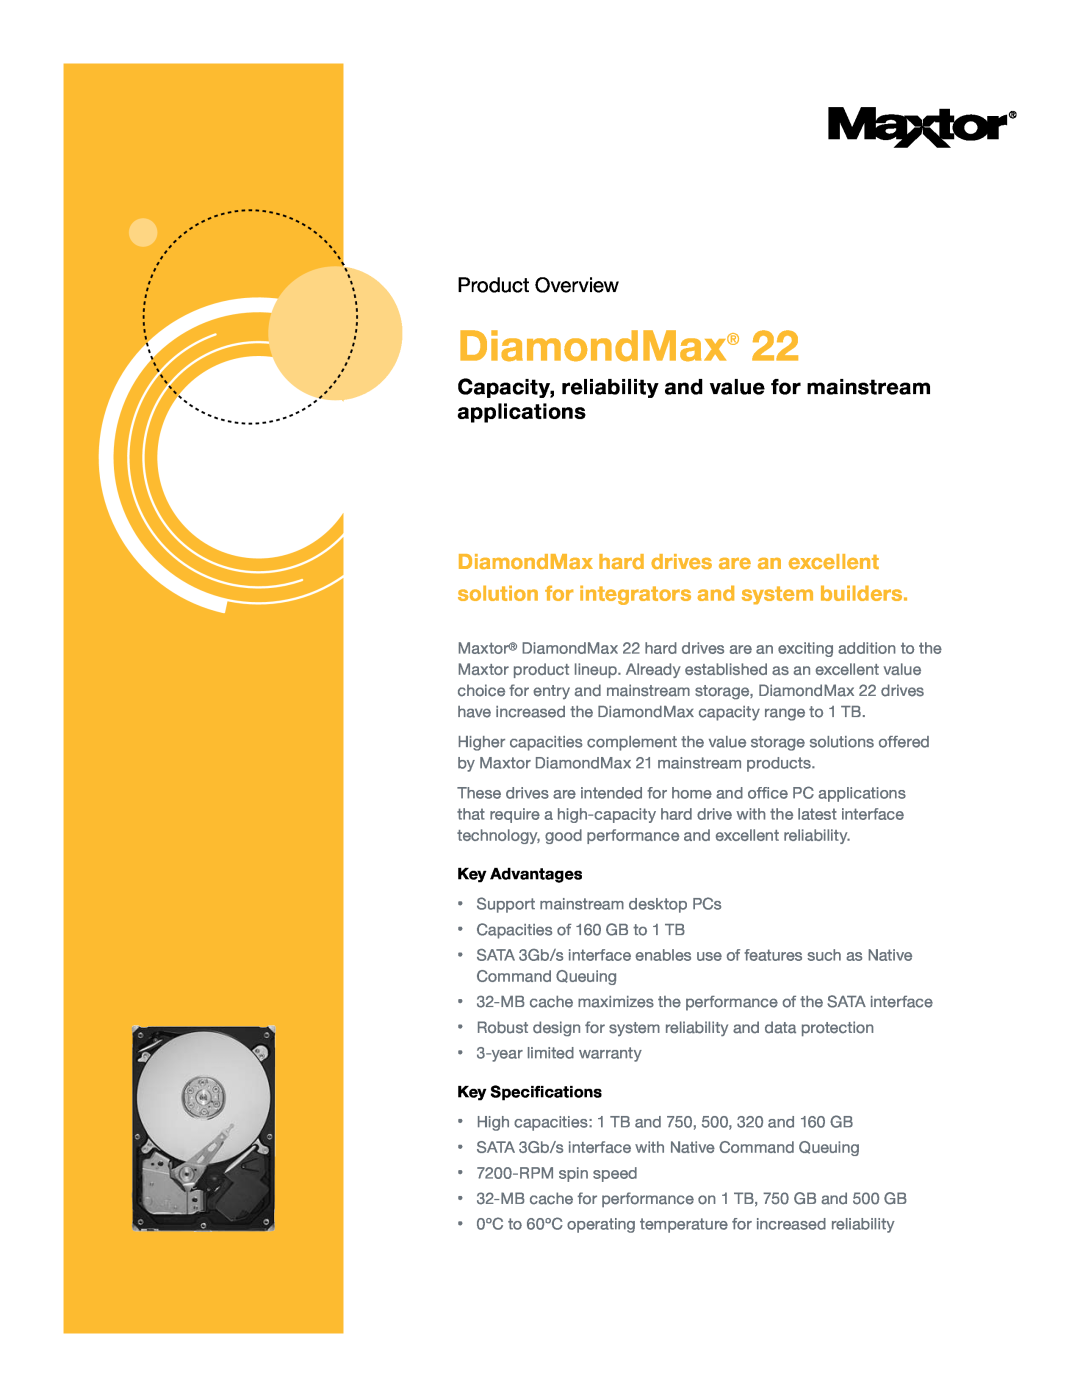 Maxtor 22 warranty Capacity, reliability and value for mainstream applications, Key Advantages, Key Specifications 